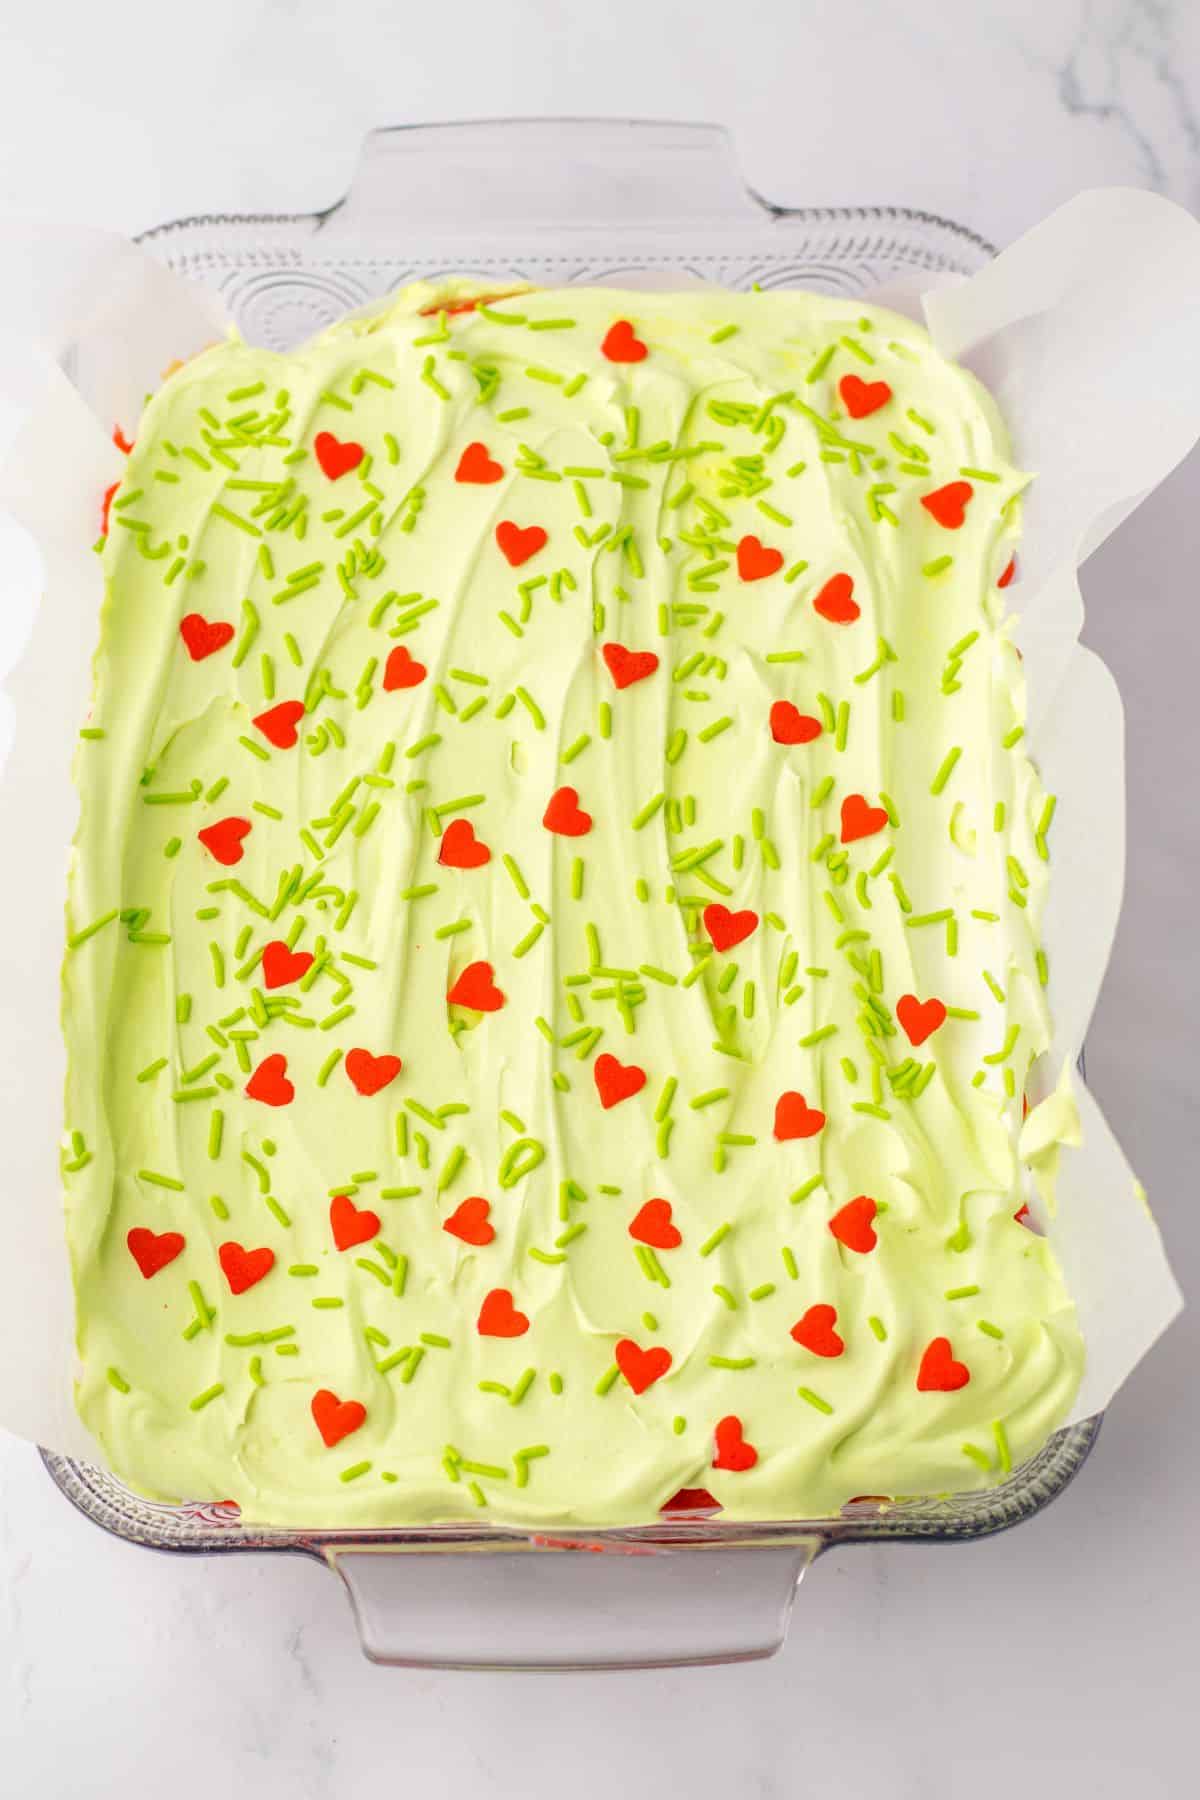 A Grinch-themed layered dessert featuring a green and red heart shaped cake.